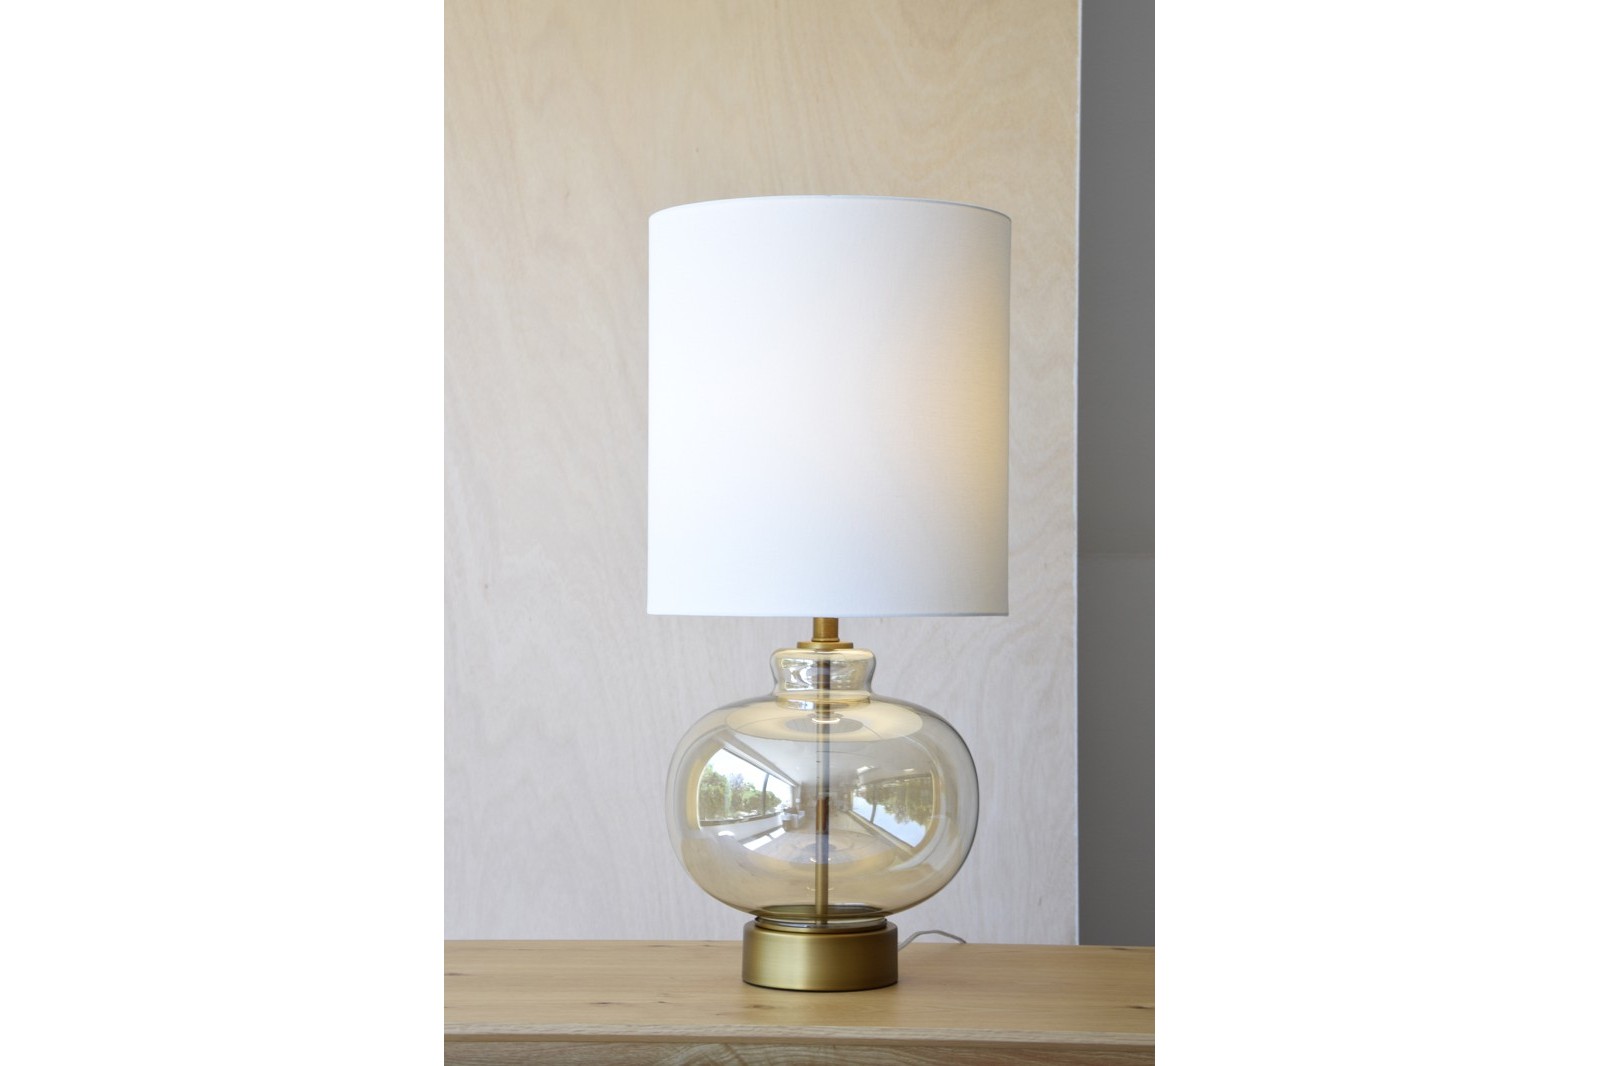 ORBE TABLE LAMP. AMBER GLASS